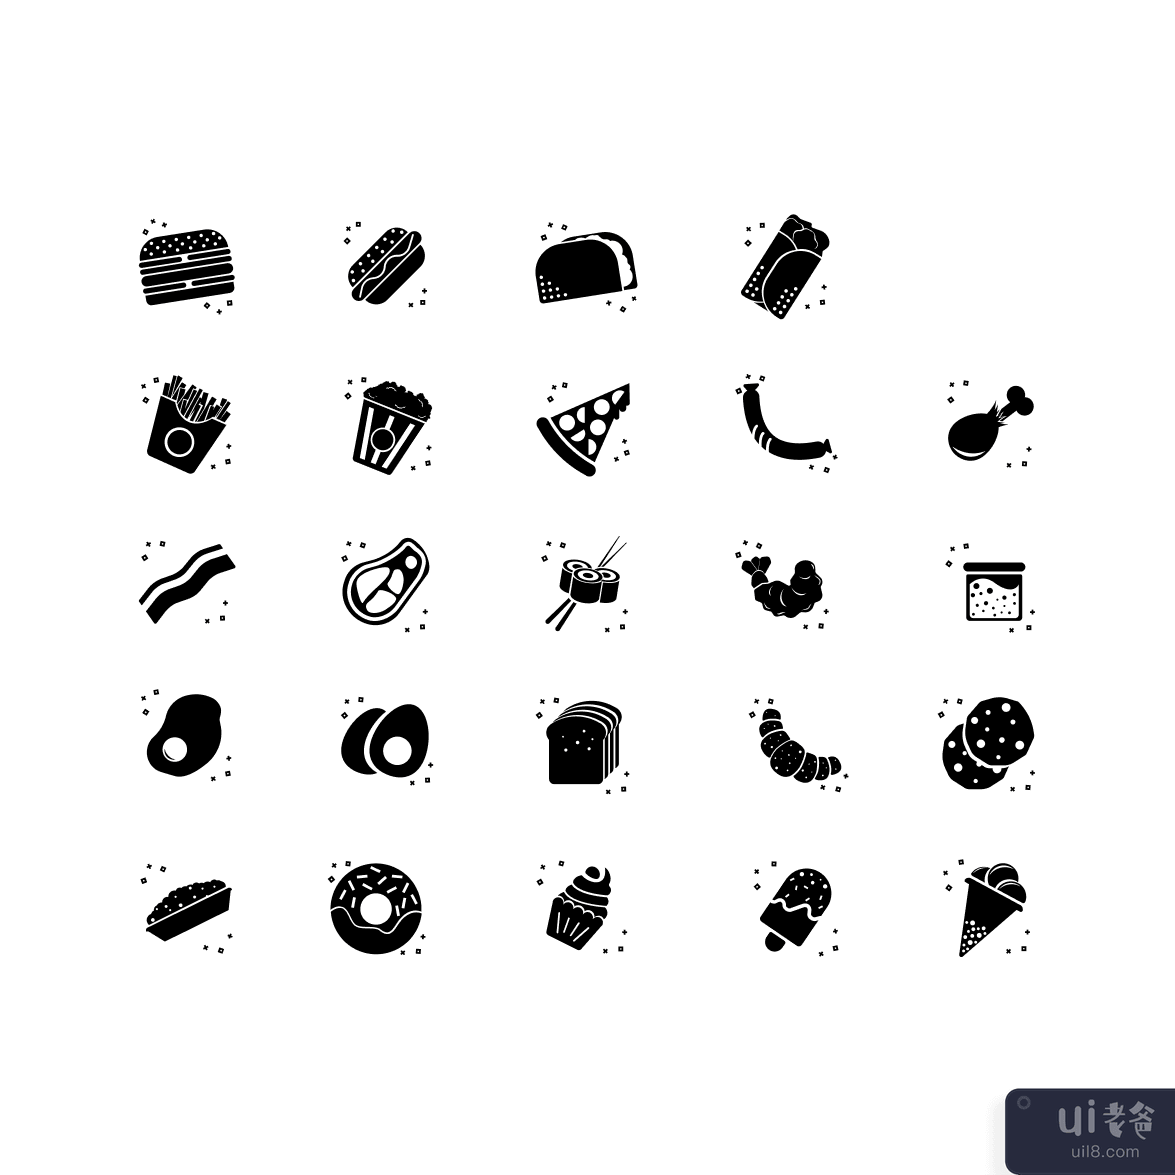 Foodiecons-字形图标集(Foodiecons - glyph icon set)插图